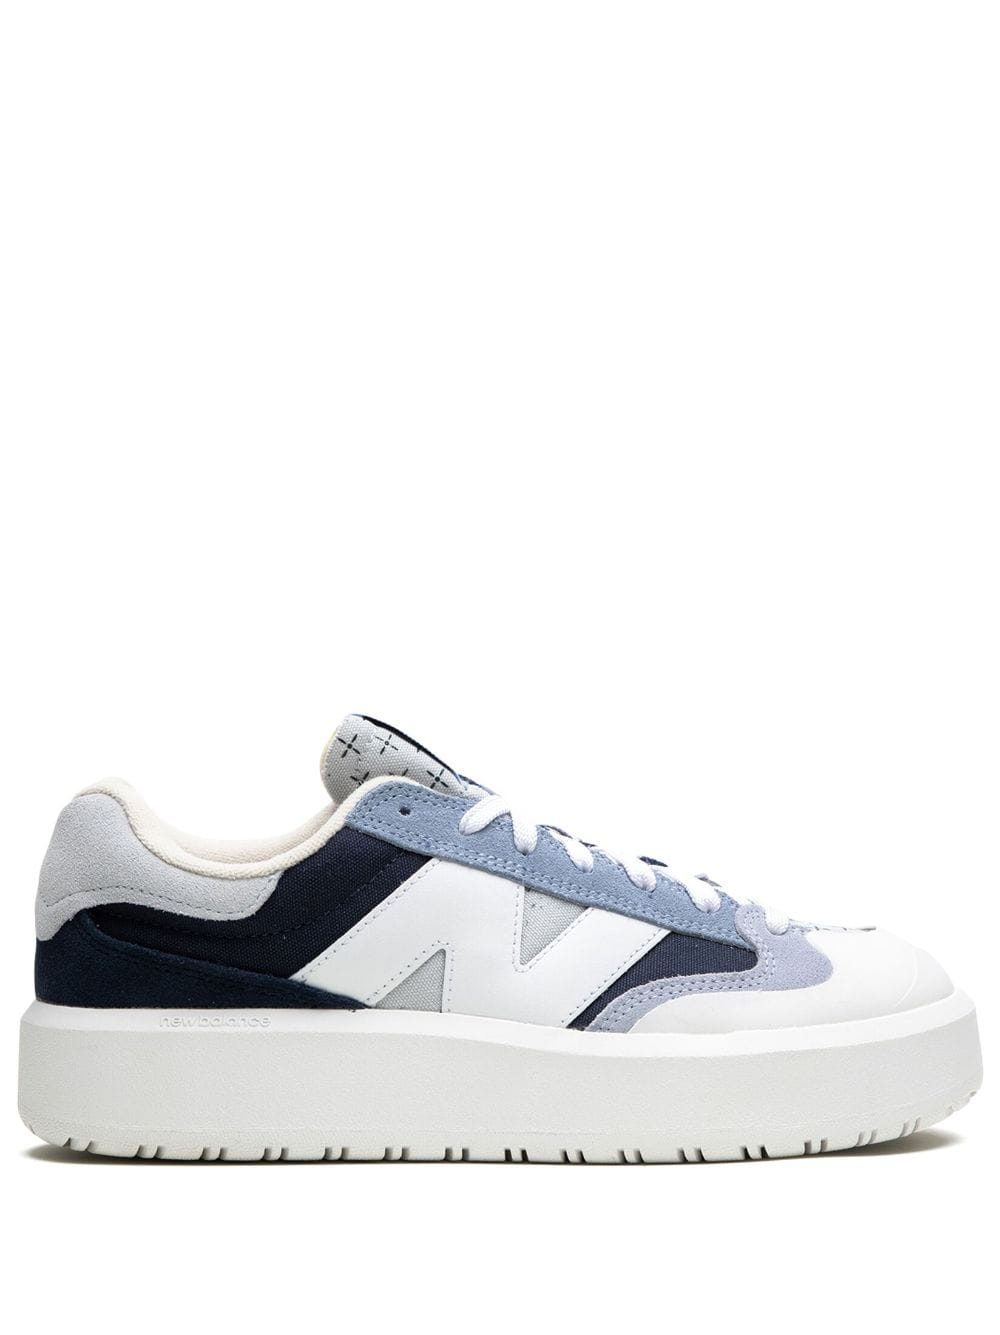 New Balance Ct302 Suede Sneakers In Blue